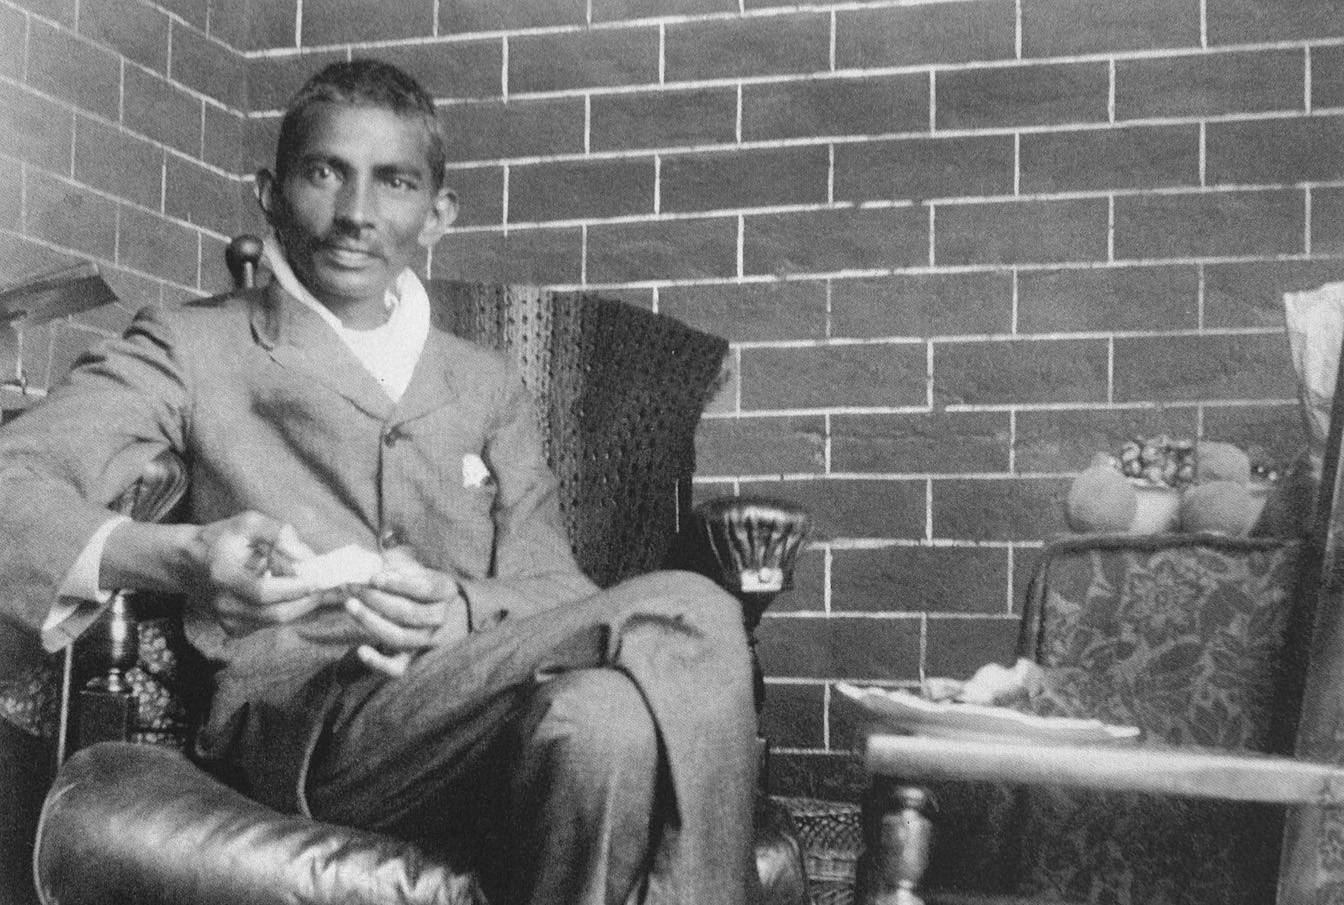 Gandhi as a young man sitting in a chair